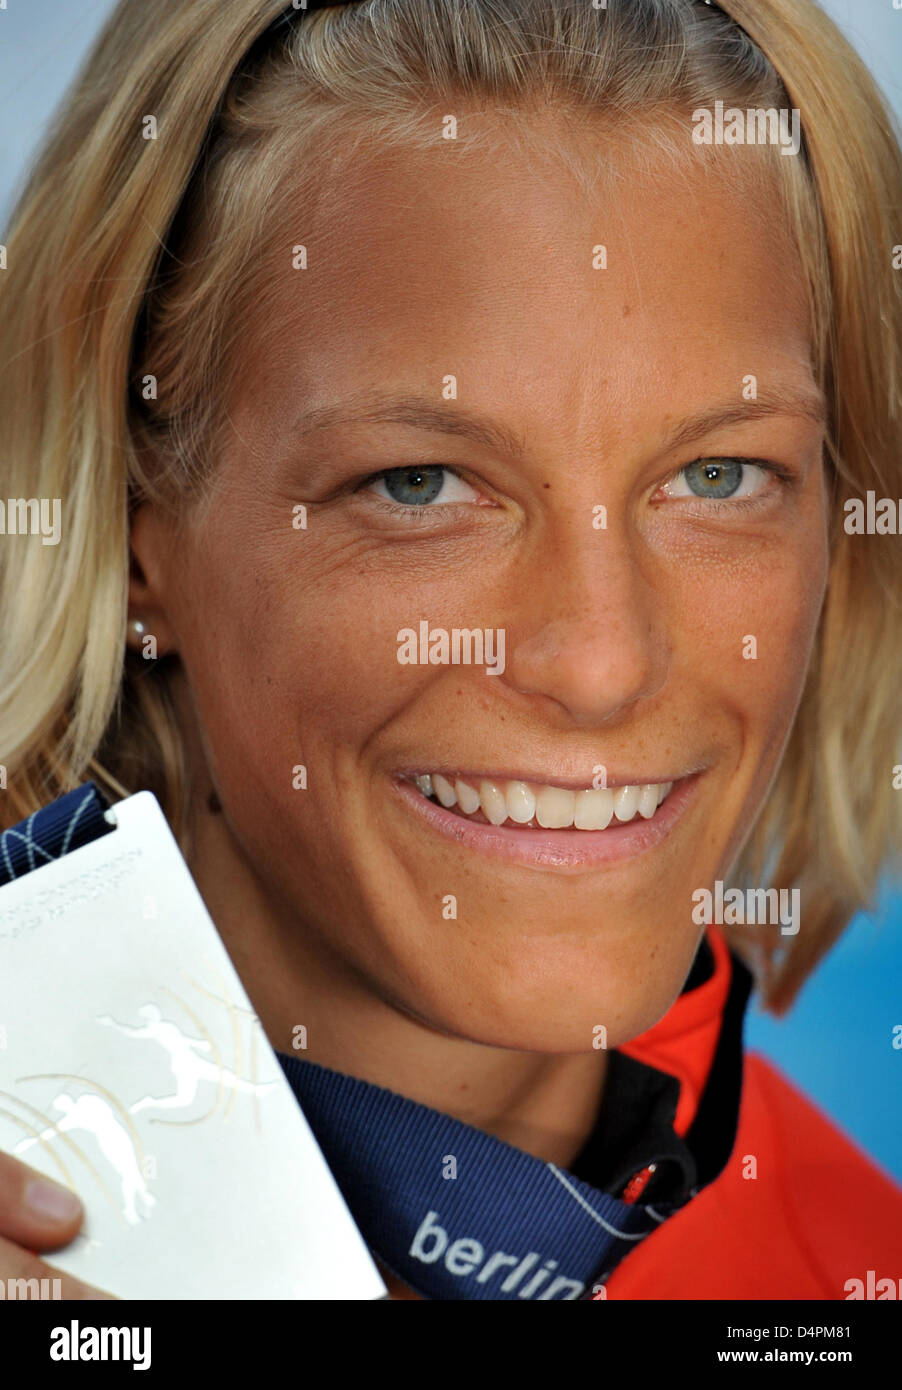 German Jennifer Oeser shows her silver medal during the Heptathlon Medal Ceremony at the 12th IAAF World Championships in Athletics, Berlin, Germany, 17 August 2009. Photo: BERND THISSEN Stock Photo